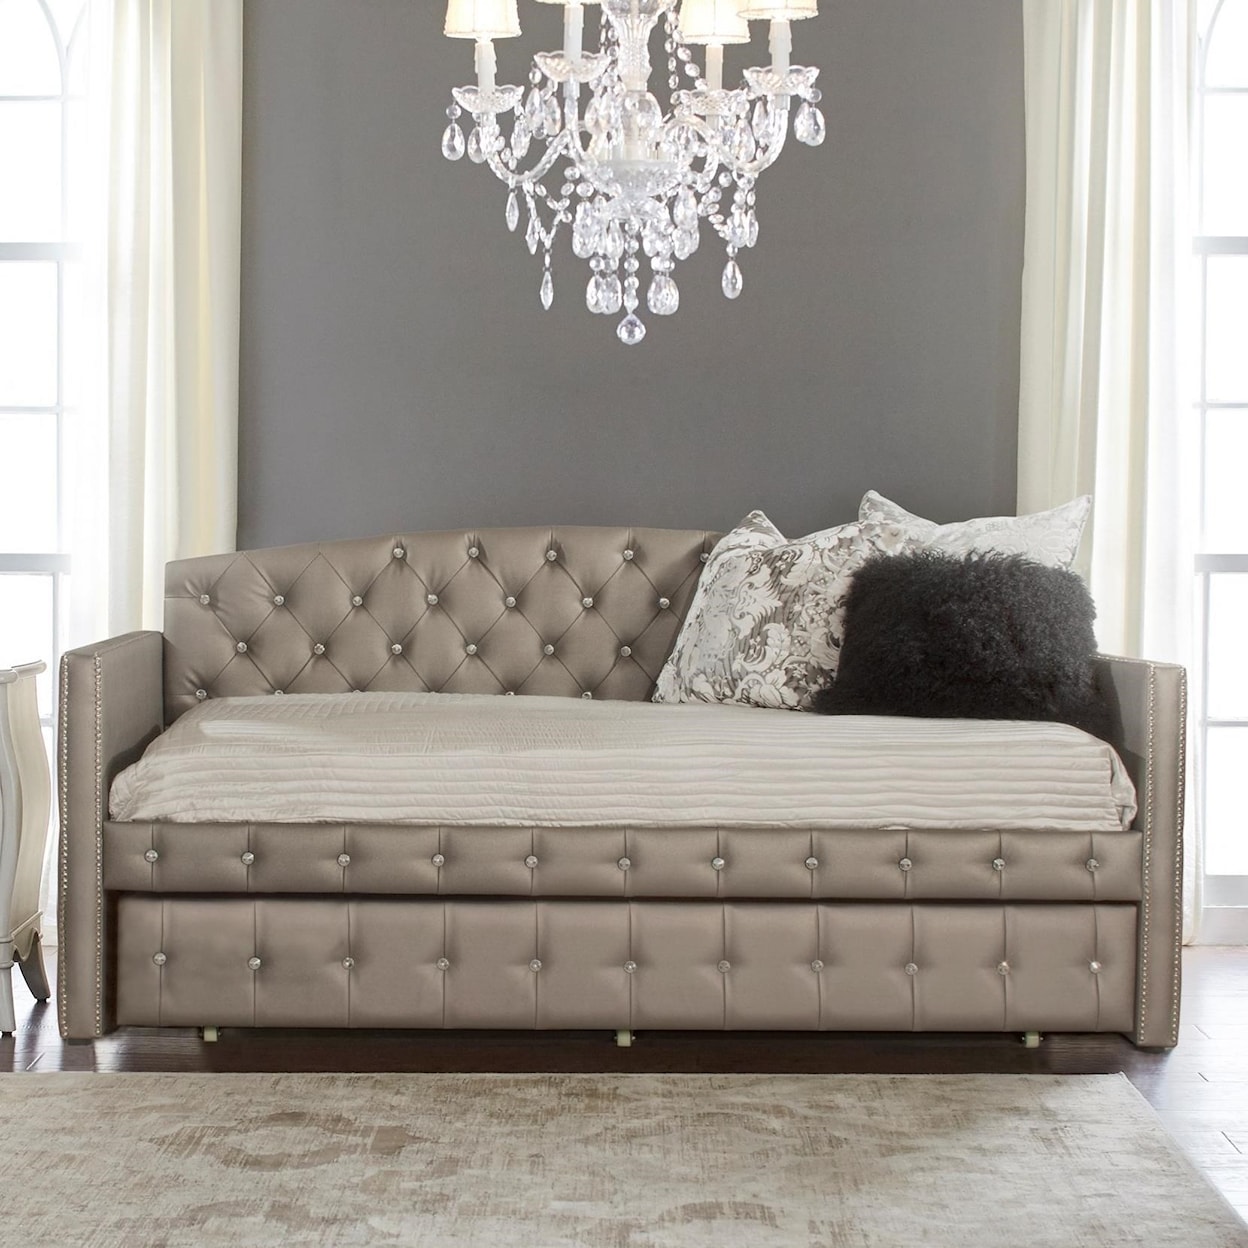 Hillsdale Memphis Daybed